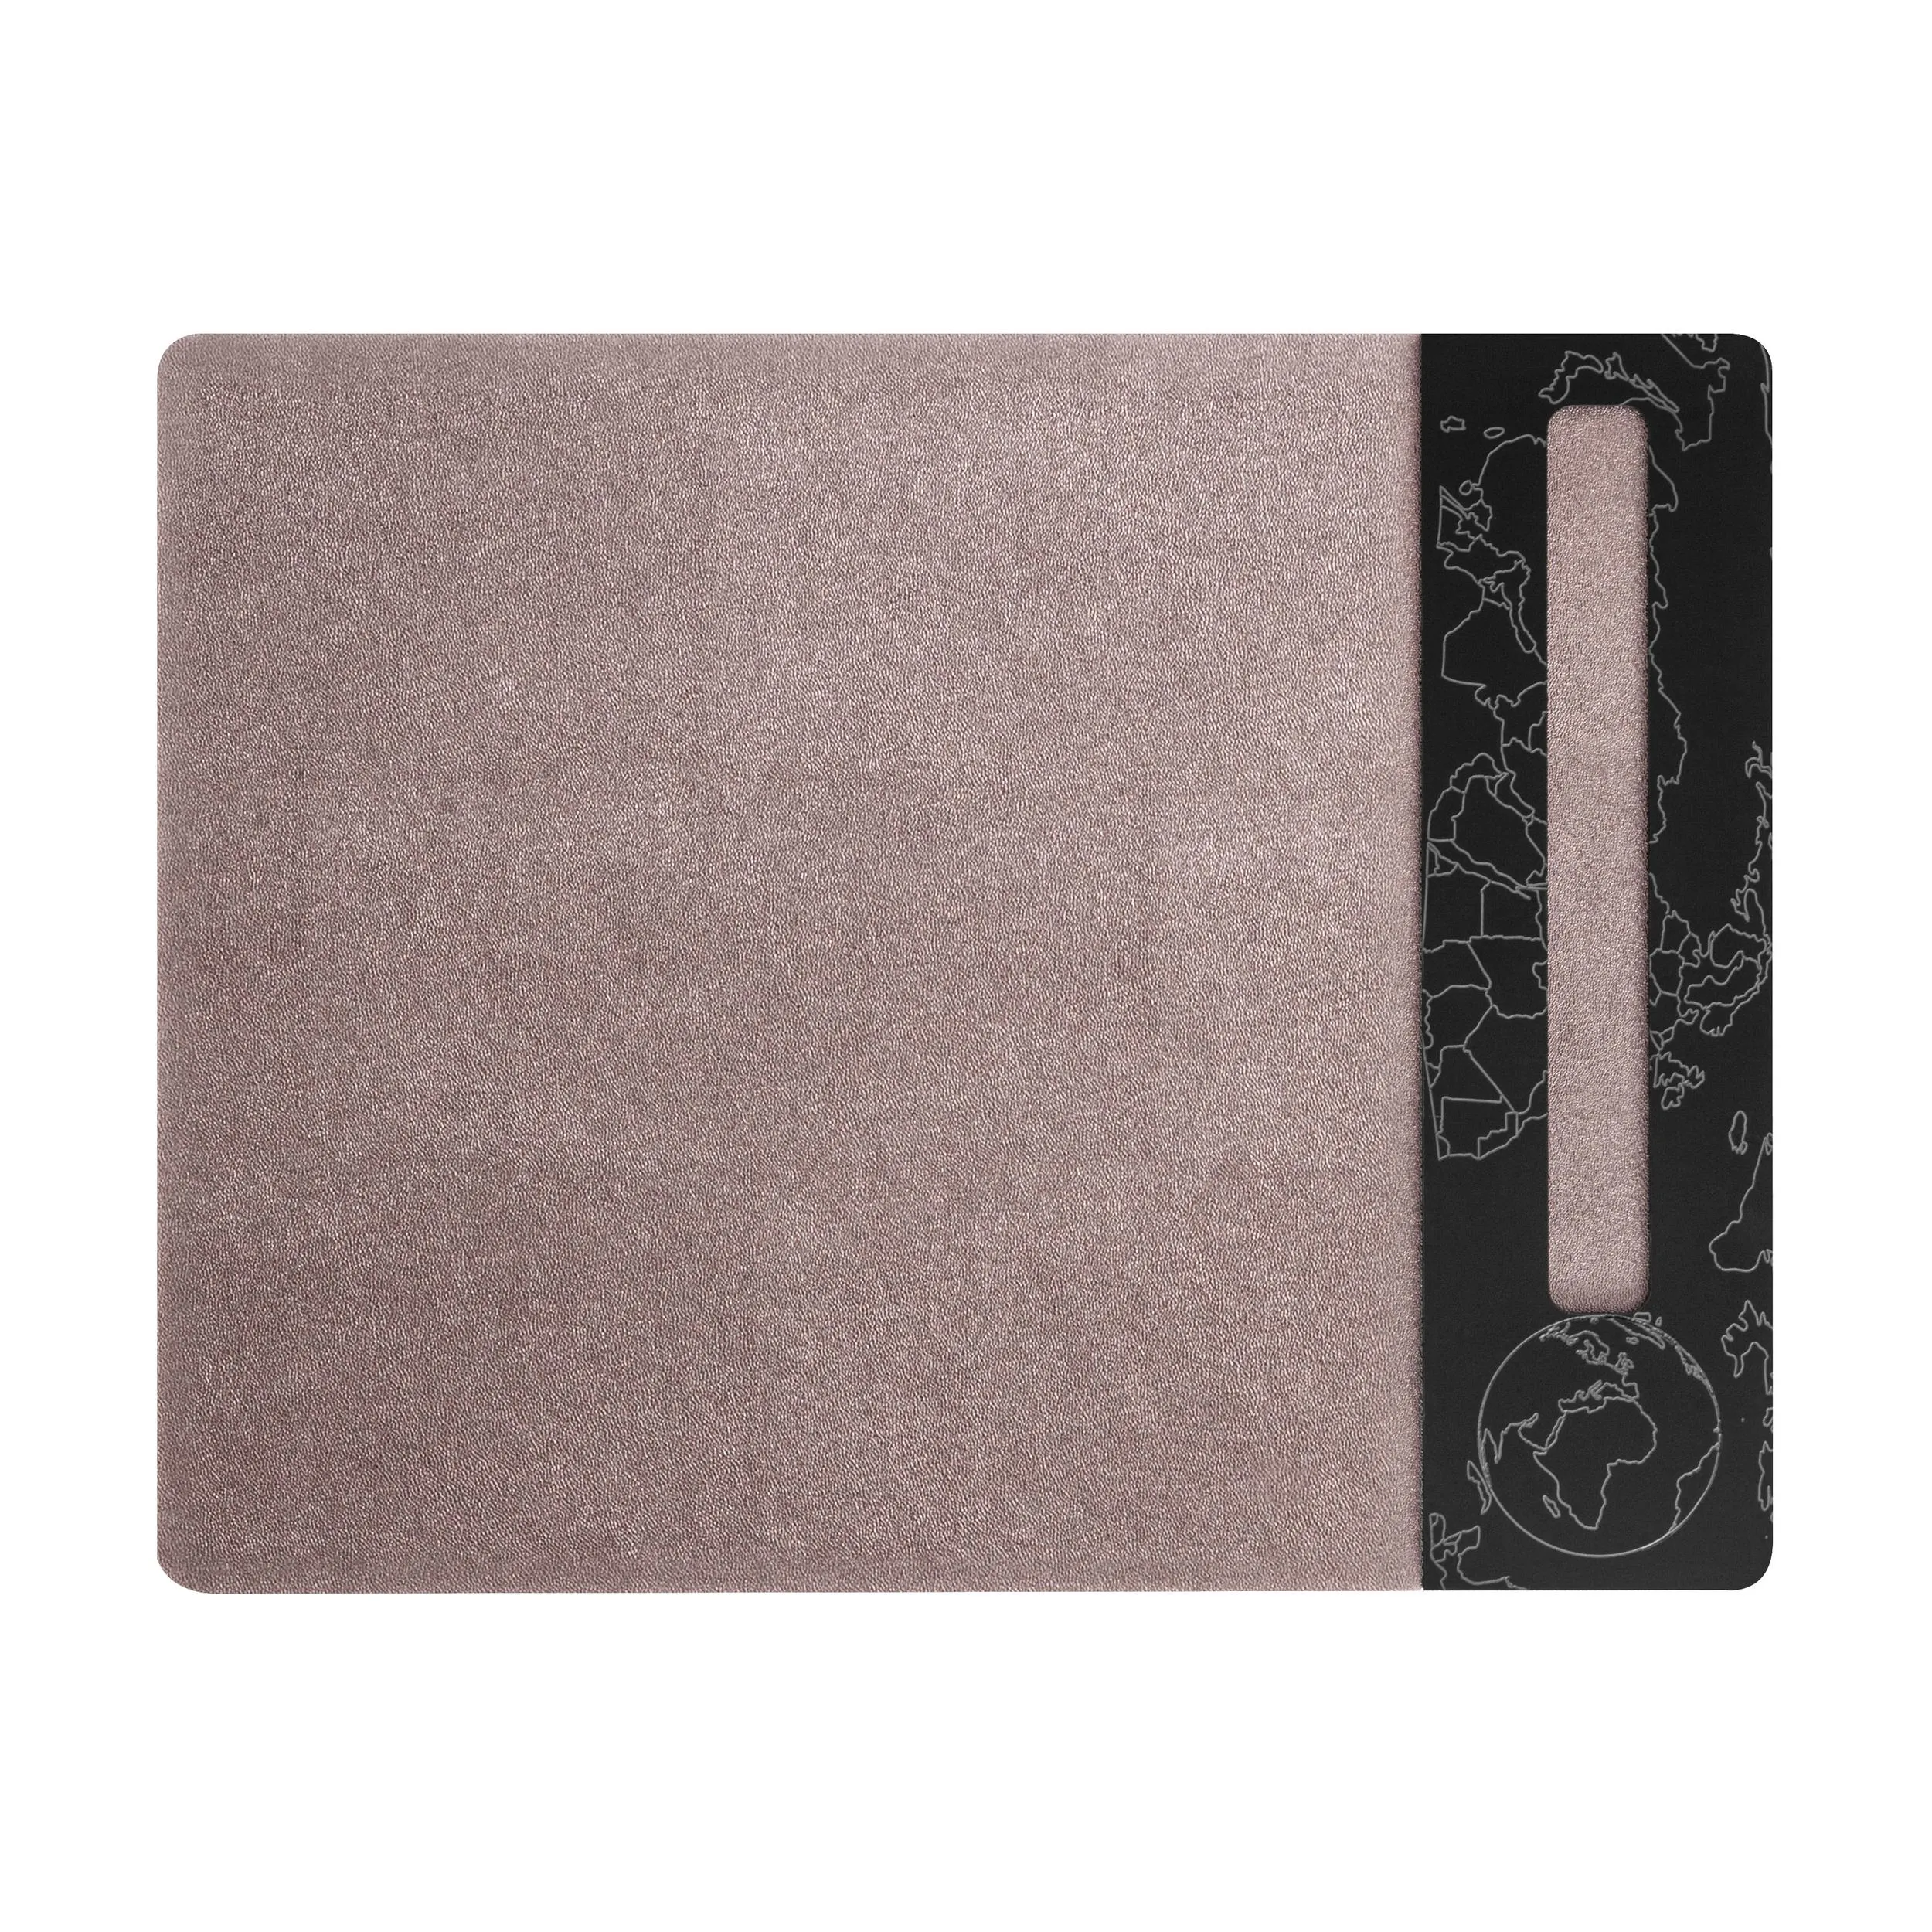 MOUSE PAD GLIDE GLOBAL THINKING NERO, 28.7x34.9H3 cm